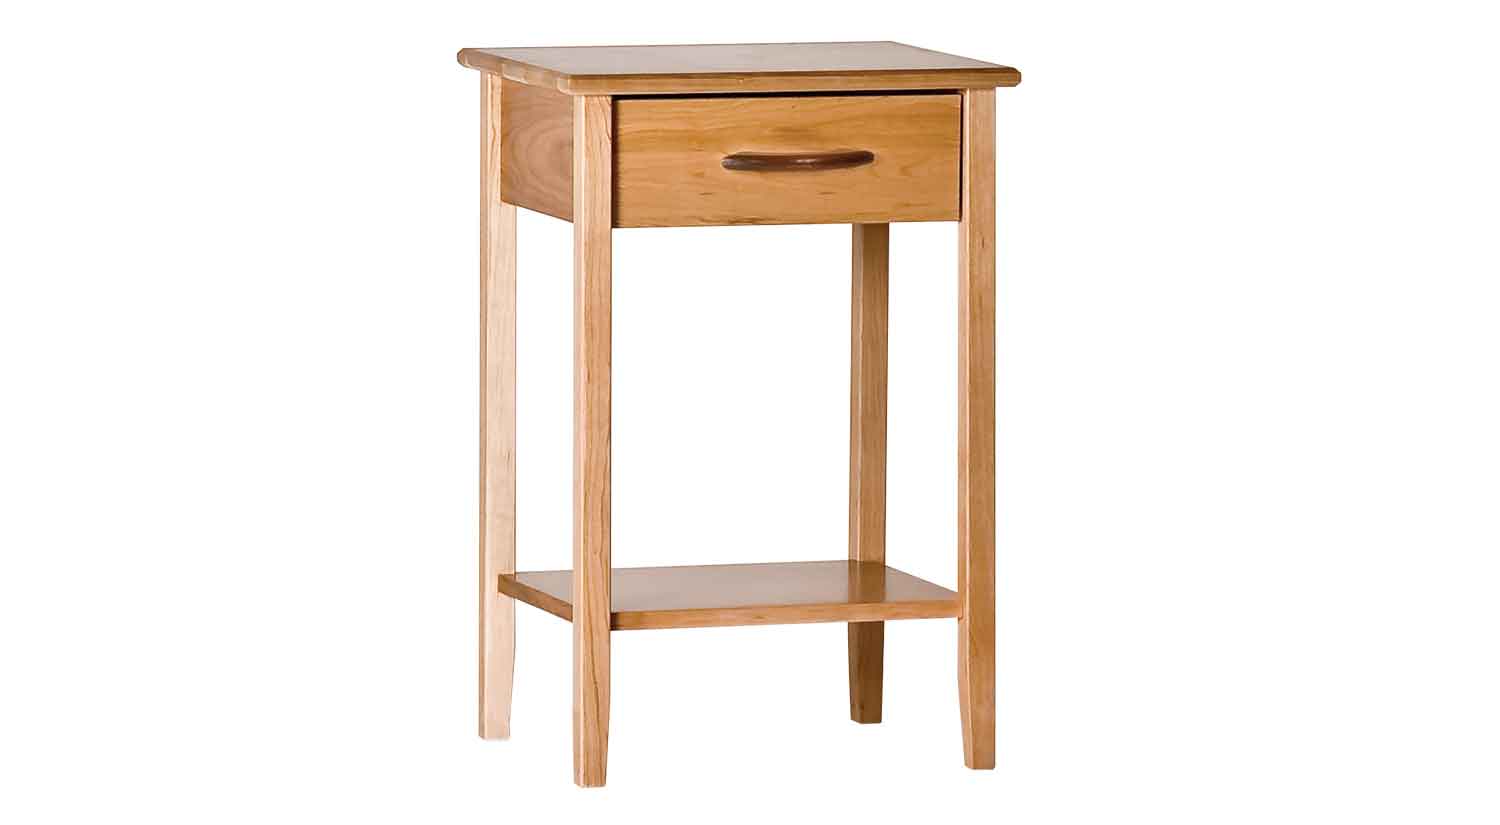 Featured image of post White Small Tall Table / Yaheetech nightstand set of 2 bedside tables with drawer slim tall telephone end table narrow hallway side table wooden white 25x25x70cm.